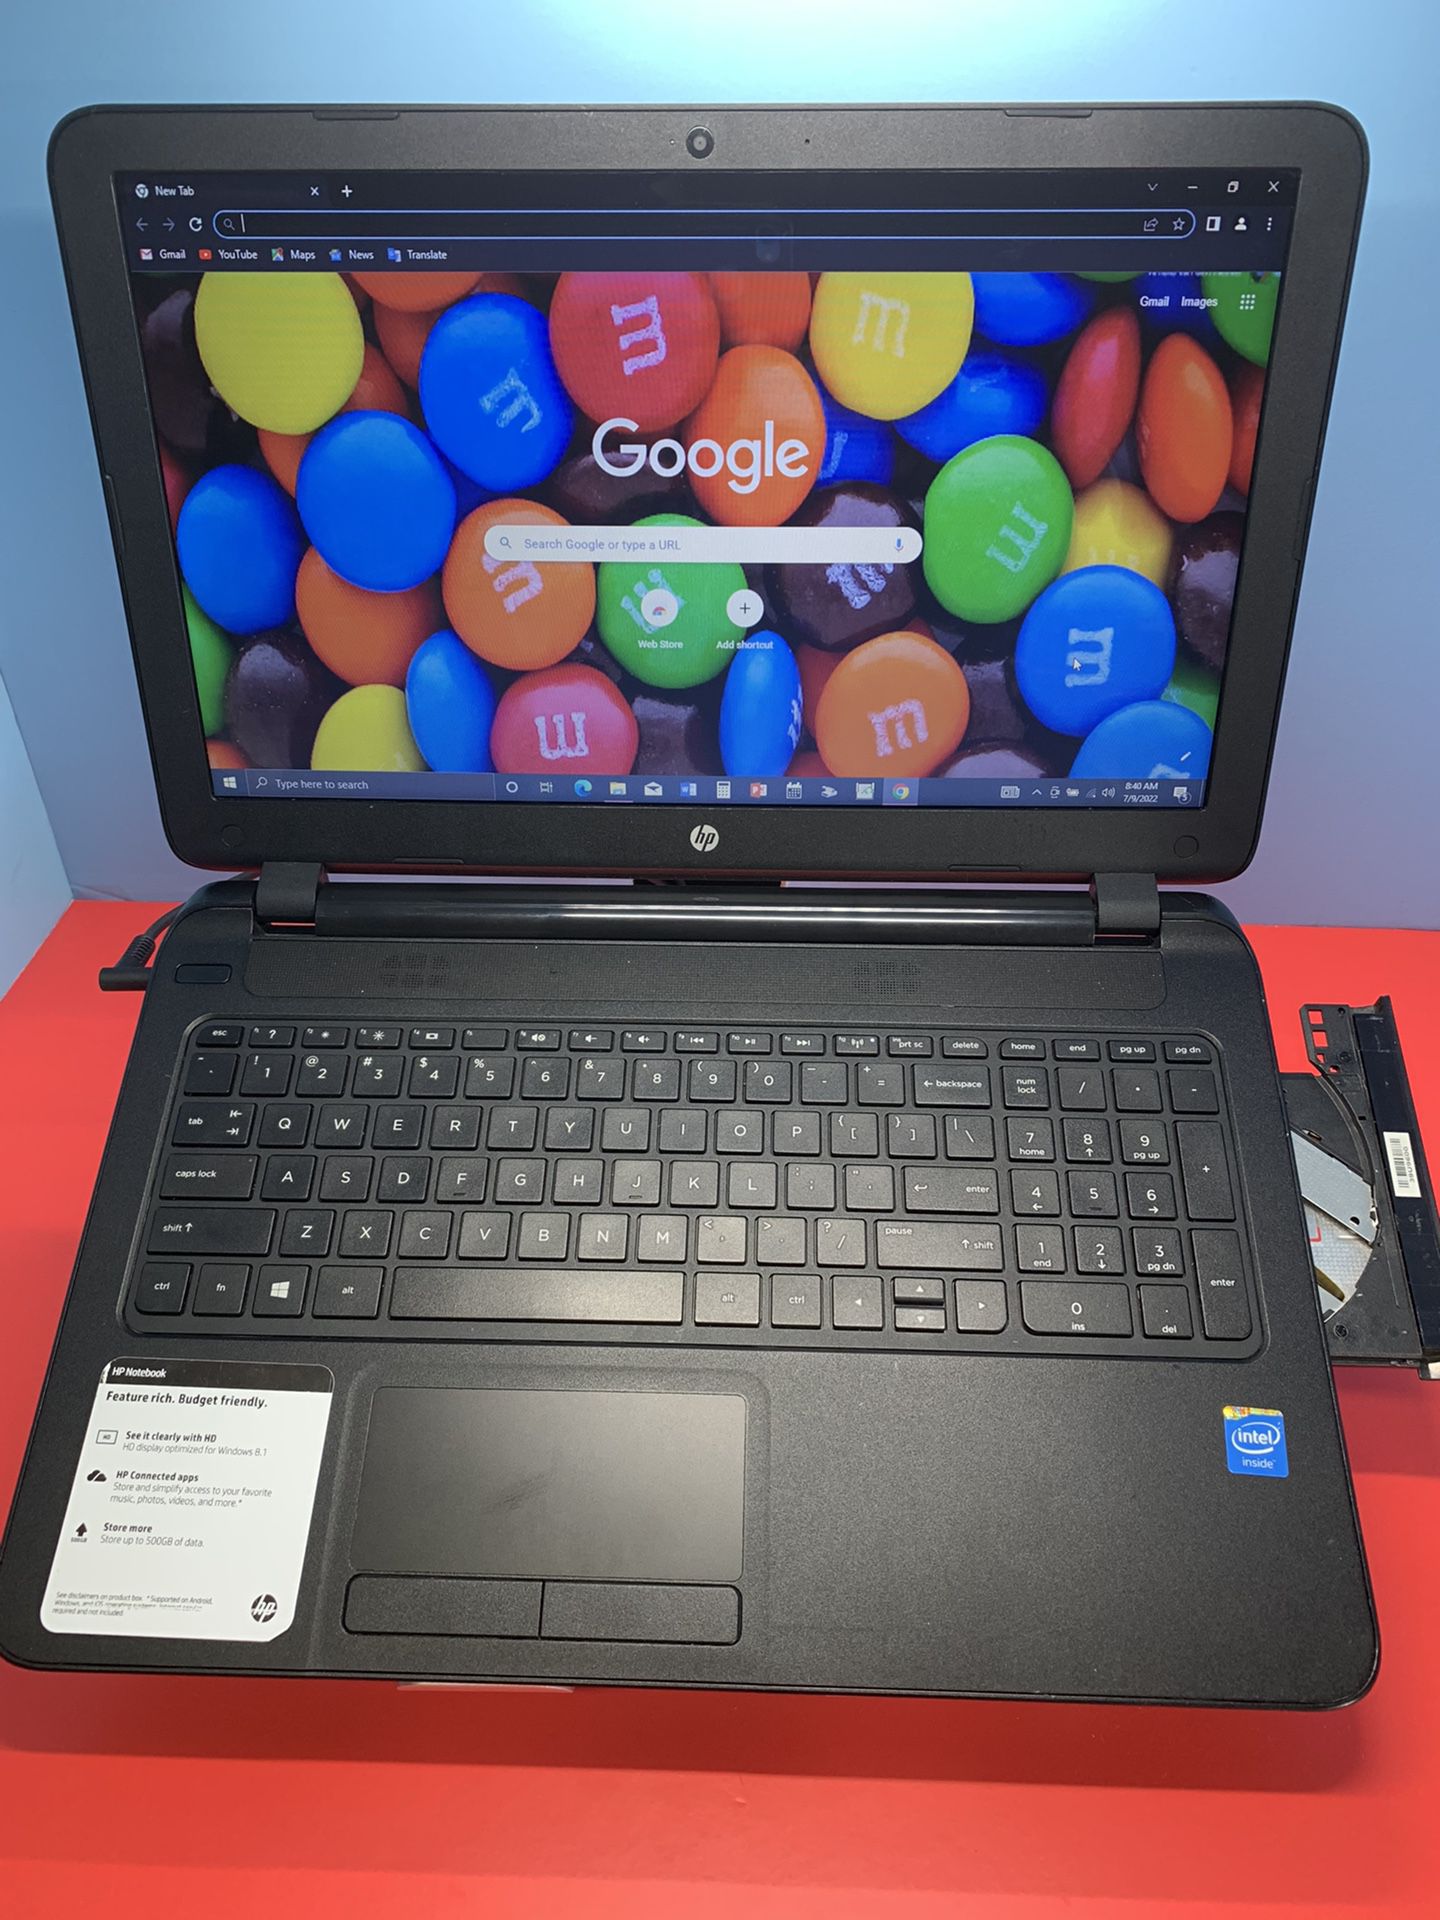 HP NOTEBOOK model # 15  500 GB  HHD ...4.0 RAM . READY FOR CLASSES ON LINE OR WORK FROM HOME  